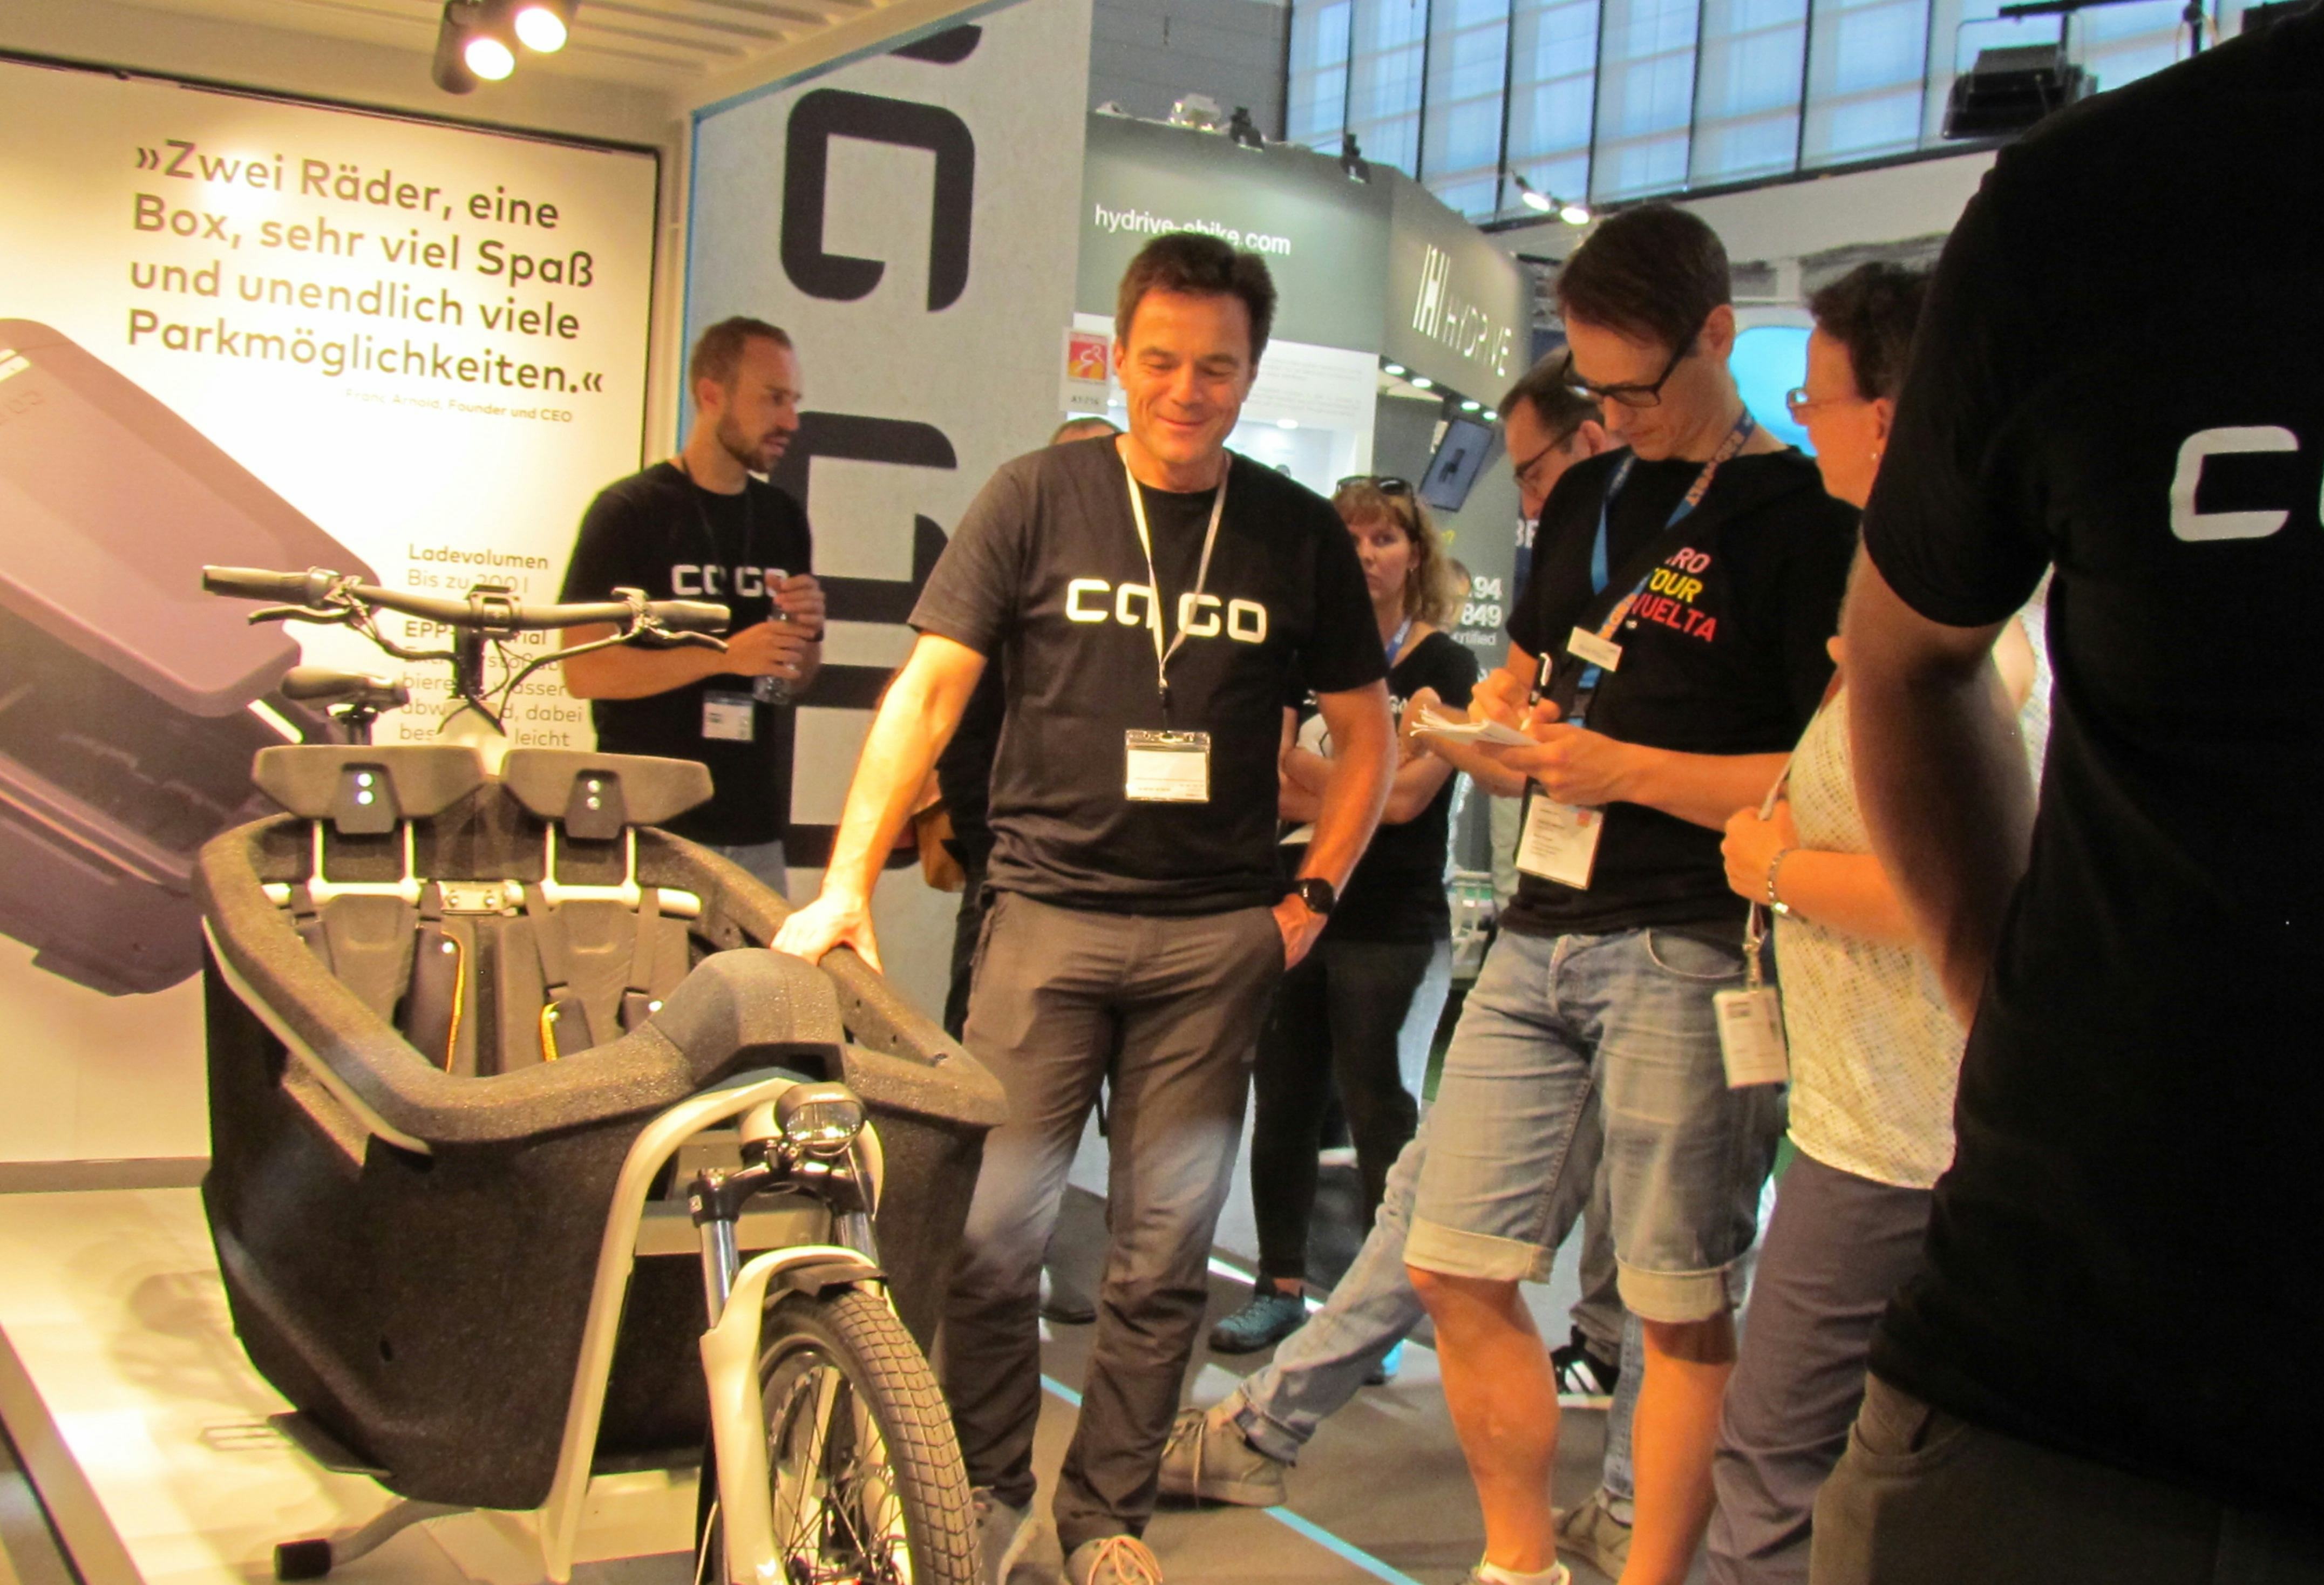 Eurobike 2020 to provide range of participation forms including on themes; next to Cargo also on Sport, Performance and Urban Mobility. – Photo Bike Europe